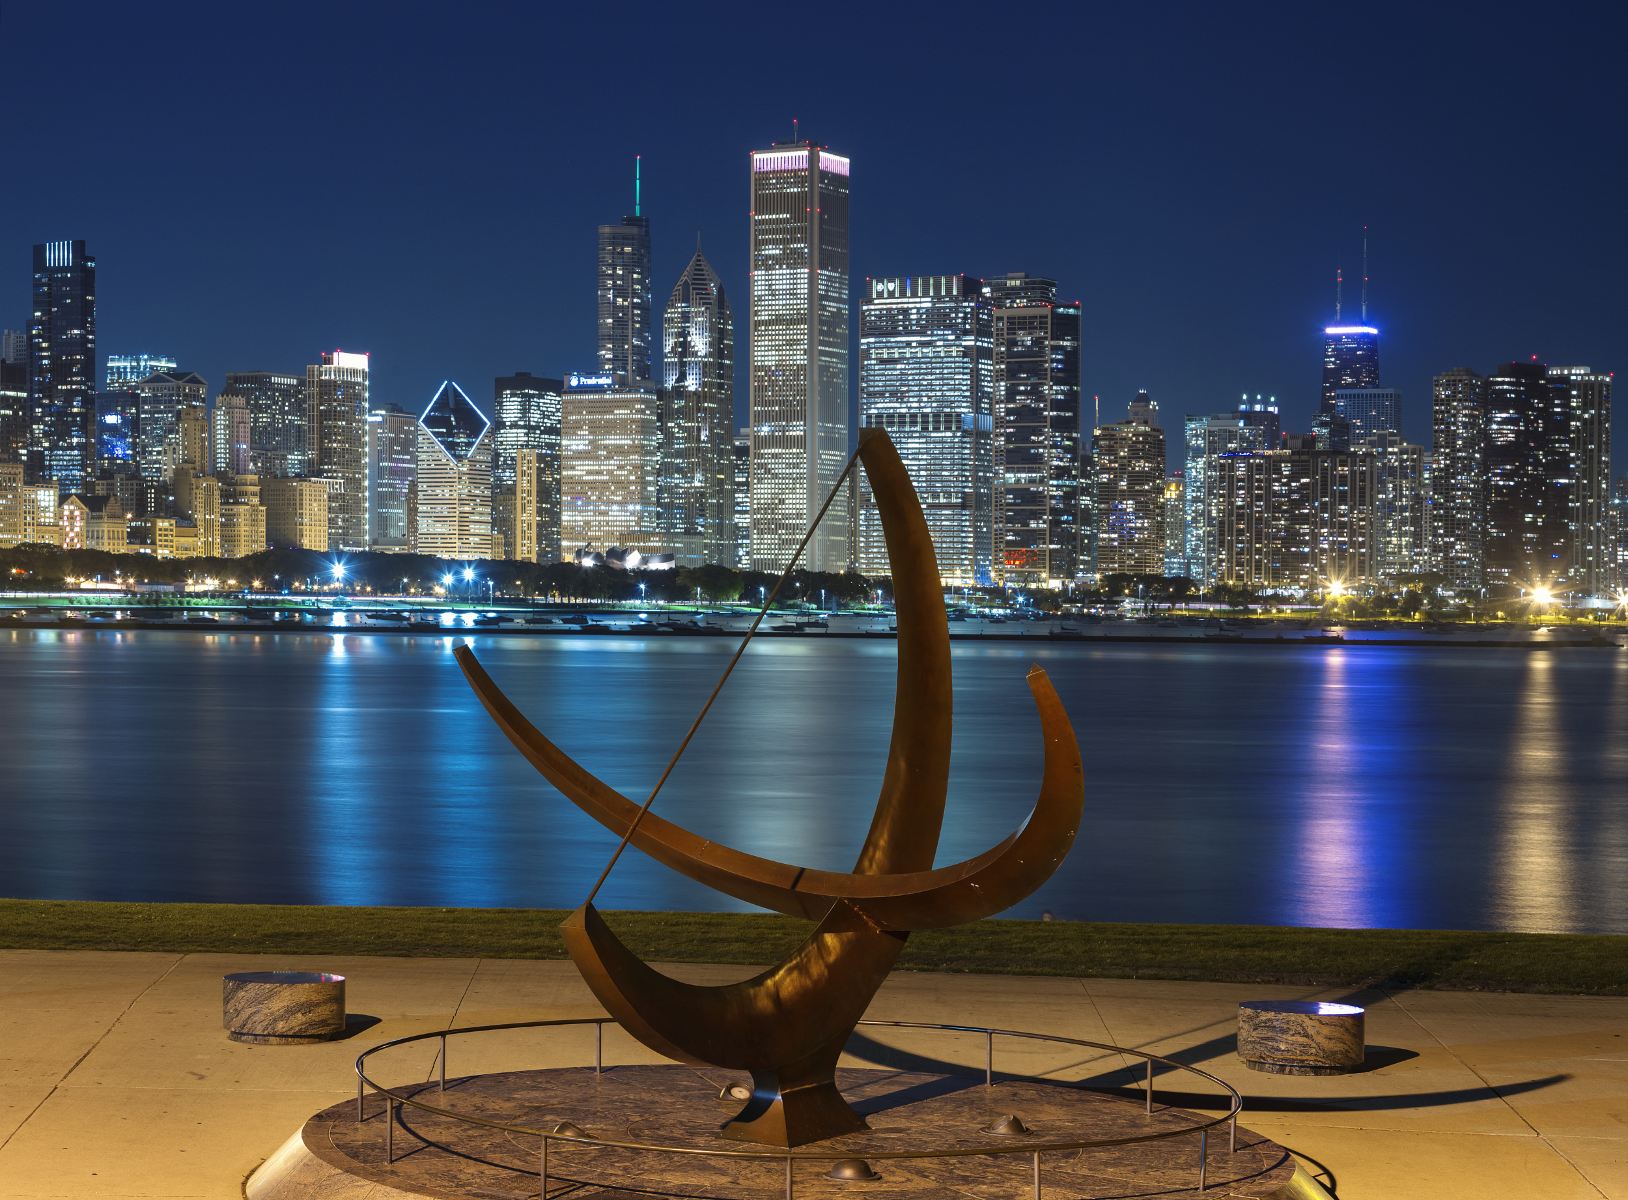 2022 Chicago Skyline: 9 Iconic Chicago Buildings and How to Explore Them